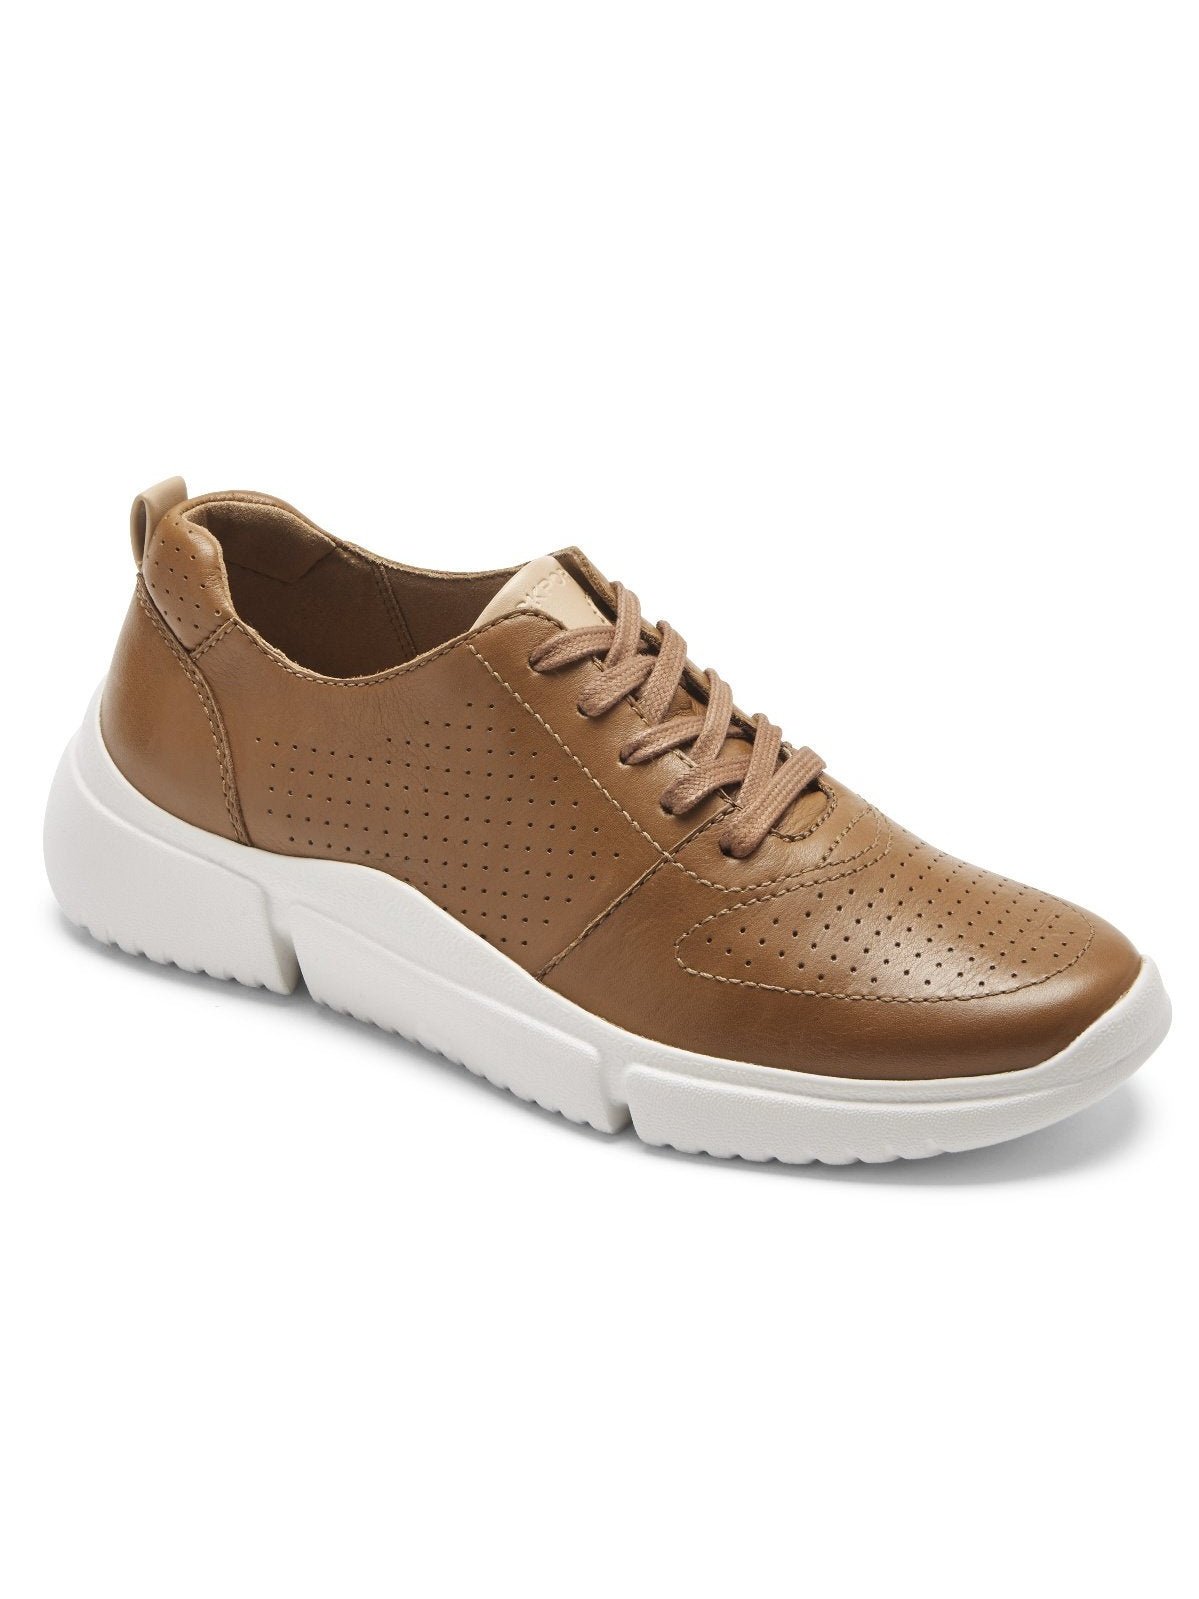 Rockport Women's R-Evolution Washable Lace-Up Sneakers Cumin Washable CI3930.